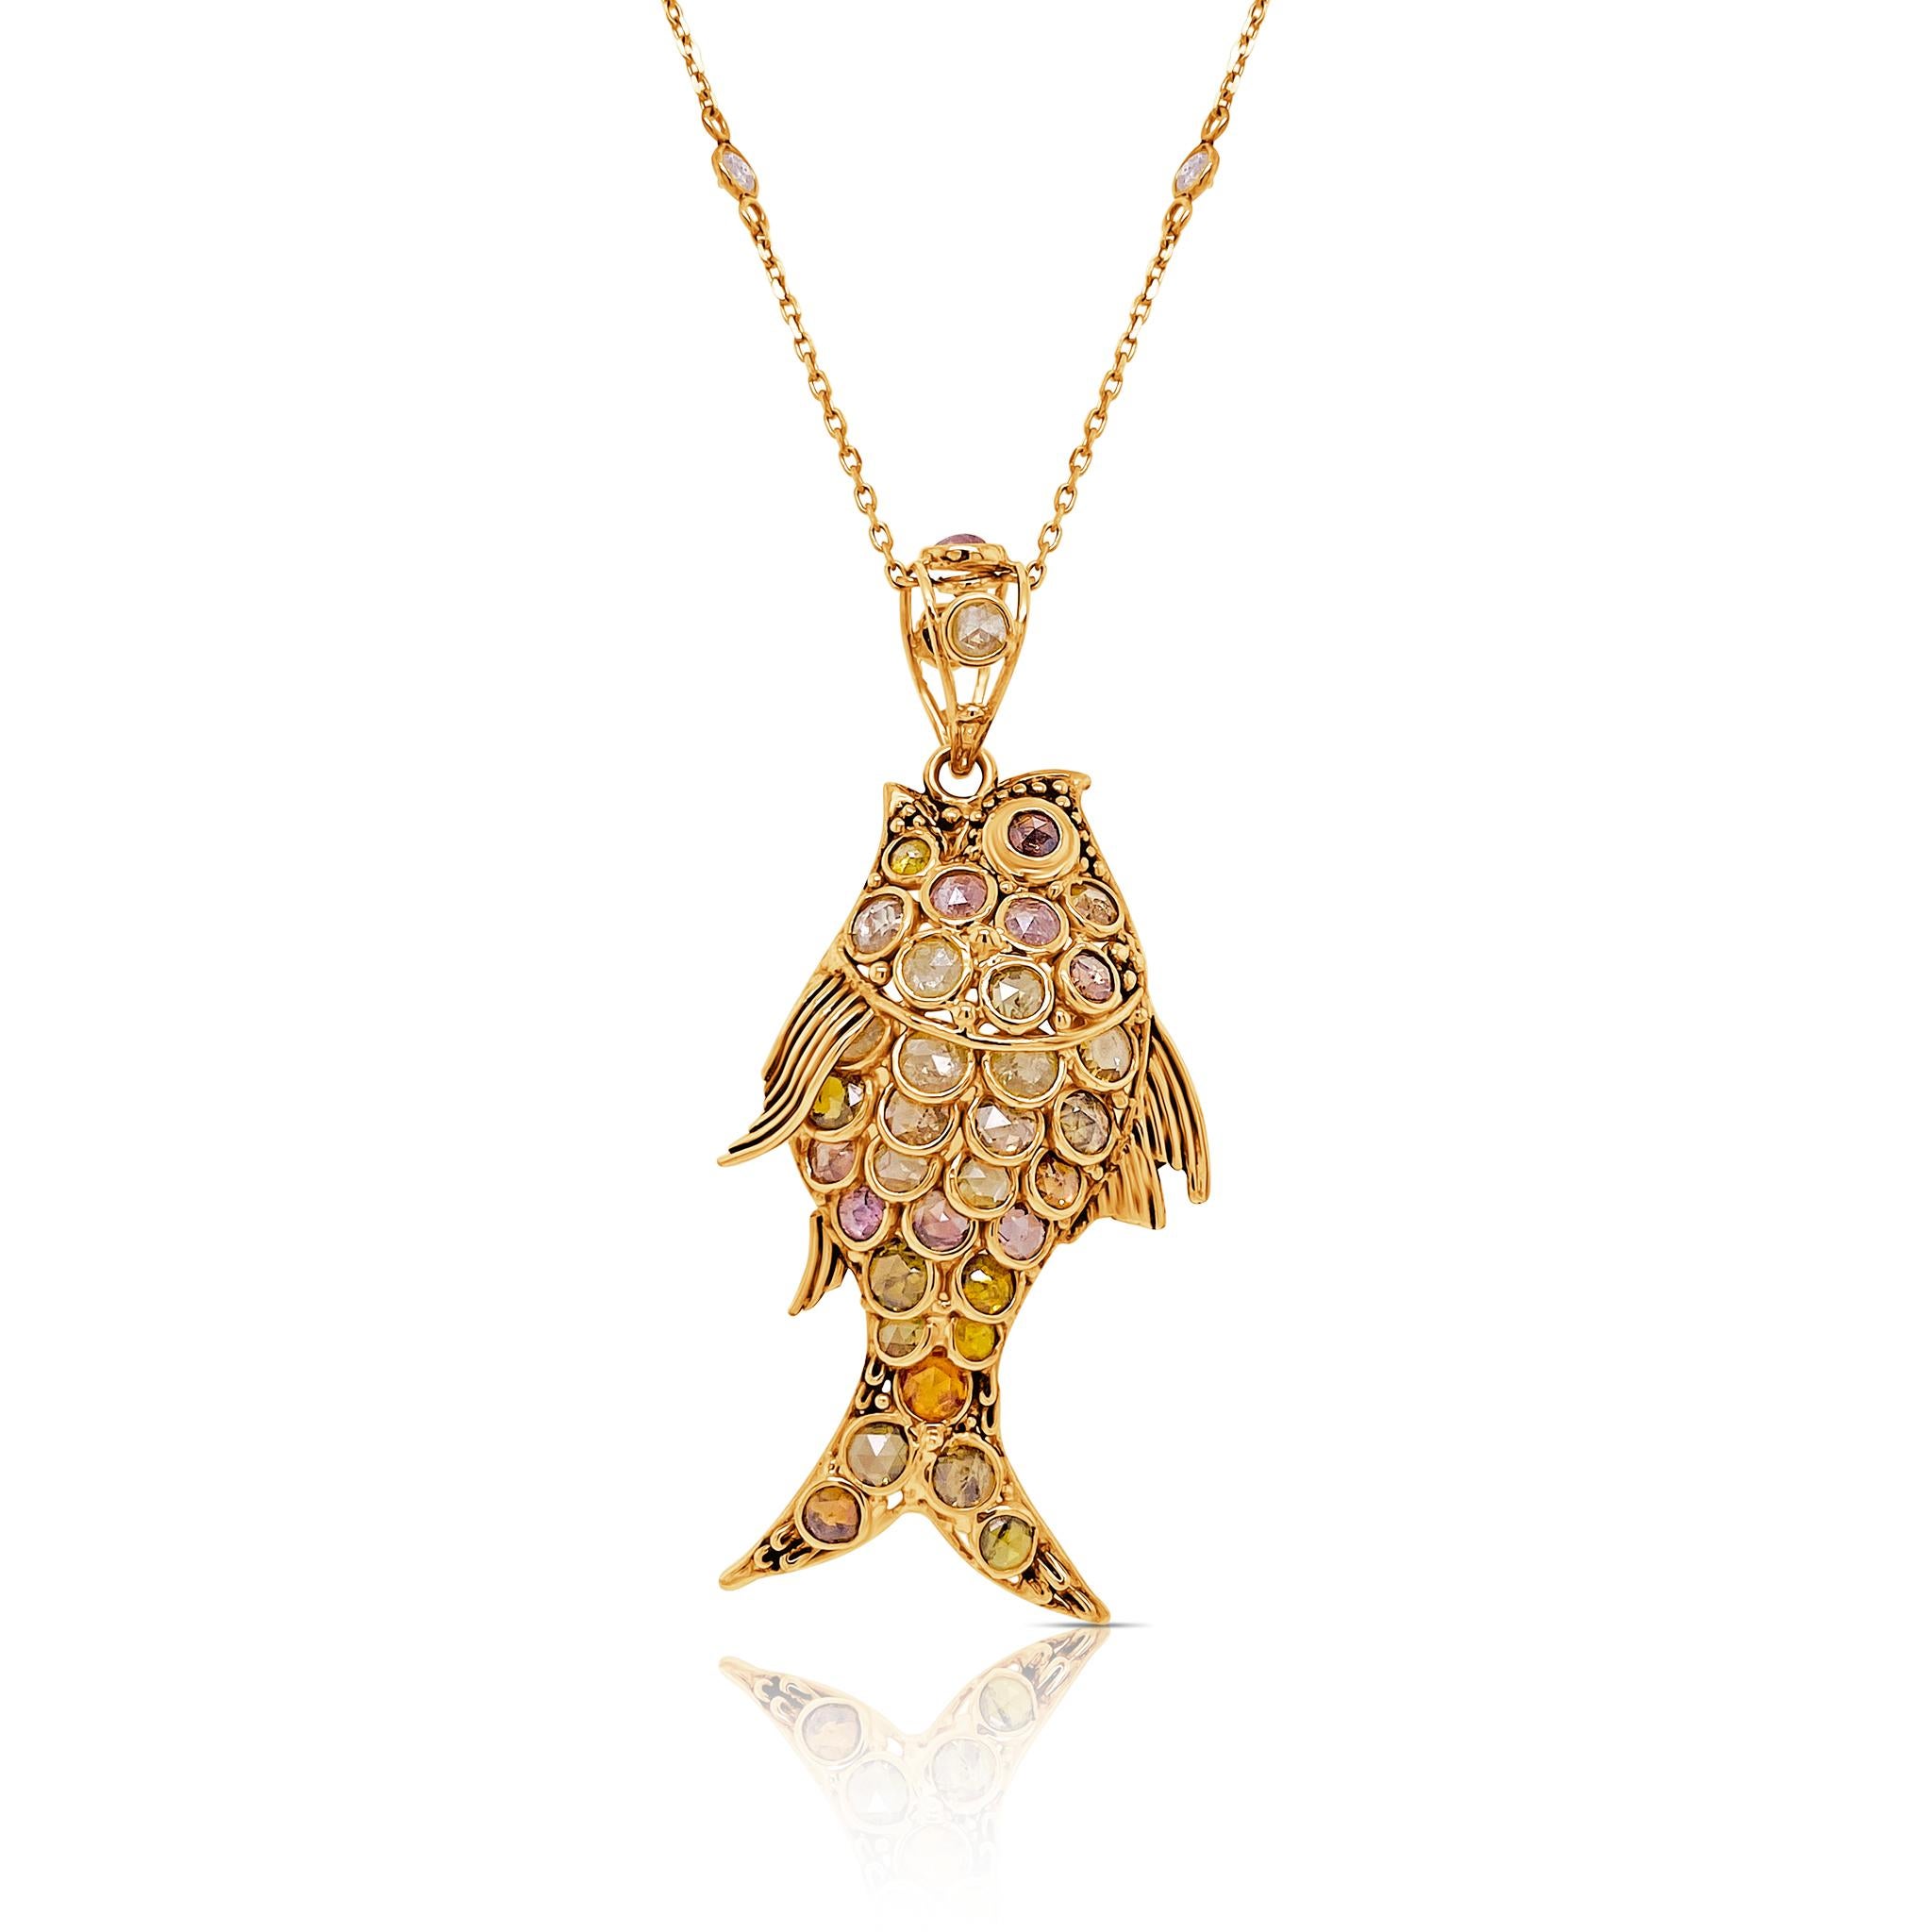 Tresor Diamond Fish Gold Pendant features 8.57 carats of diamond. The pendants are an ode to the luxurious yet classic beauty. Their contemporary and modern design makes them versatile in their use. The pendants are perfect to be worn daily, at